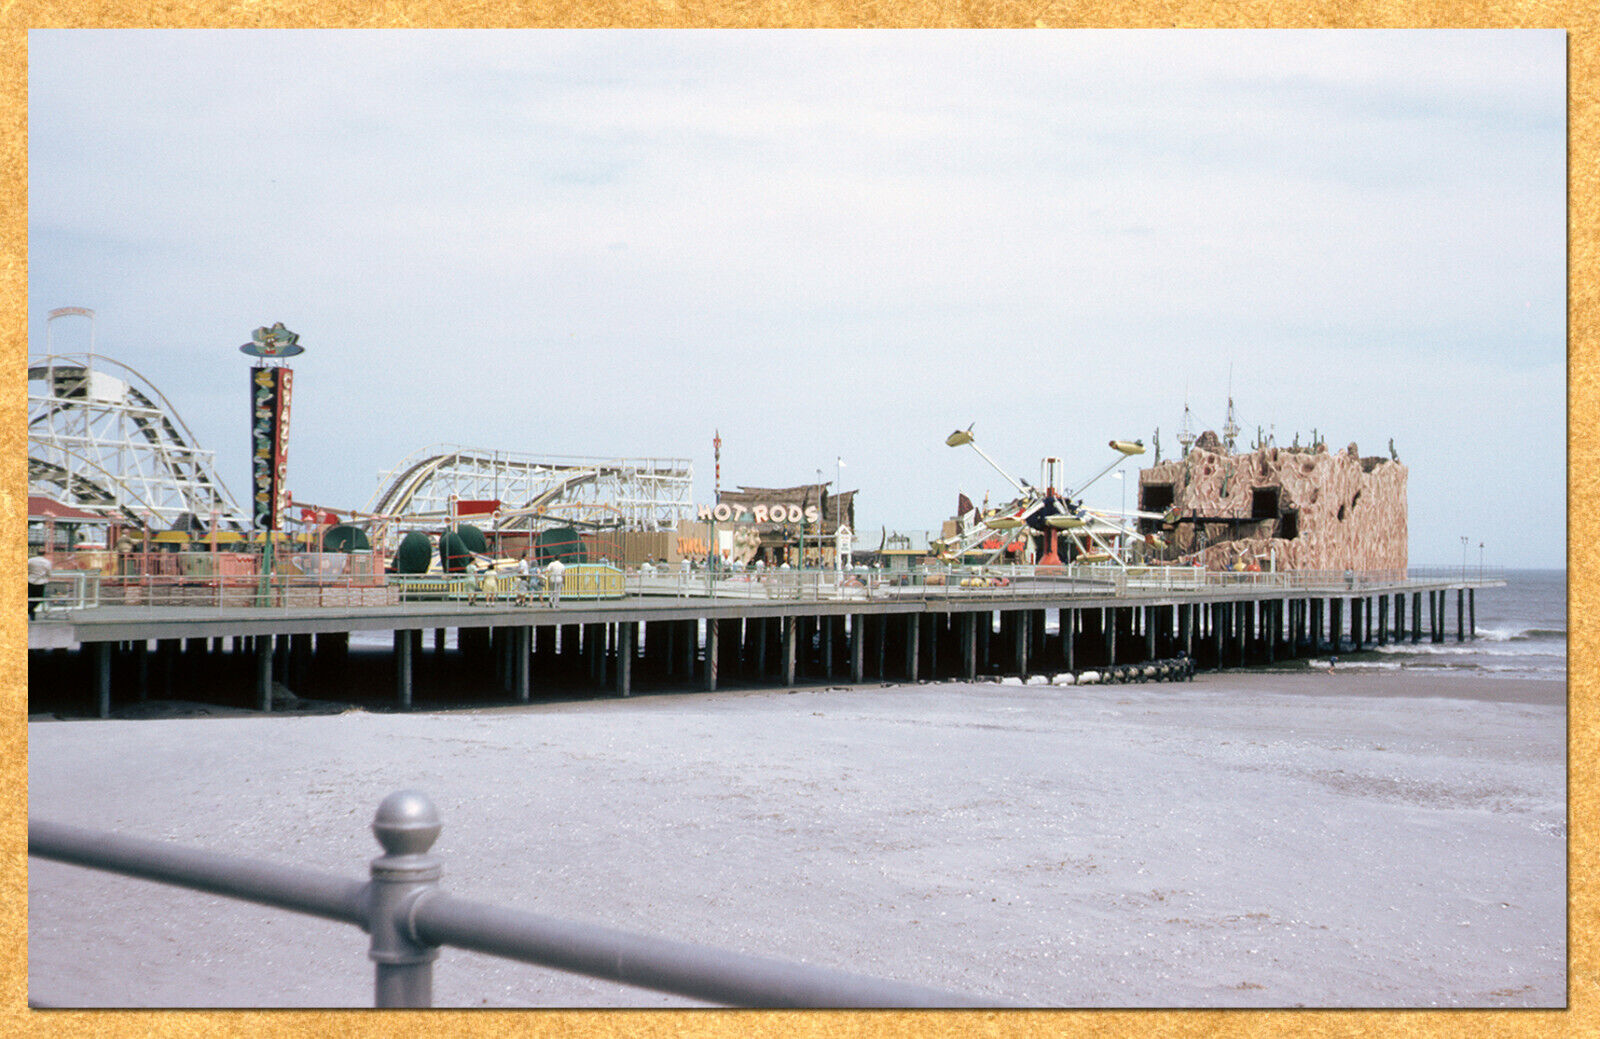 Hunt's Pier from the 1960s - WILDWOOD BY THE SEA, NJ New Jersey - Postcard